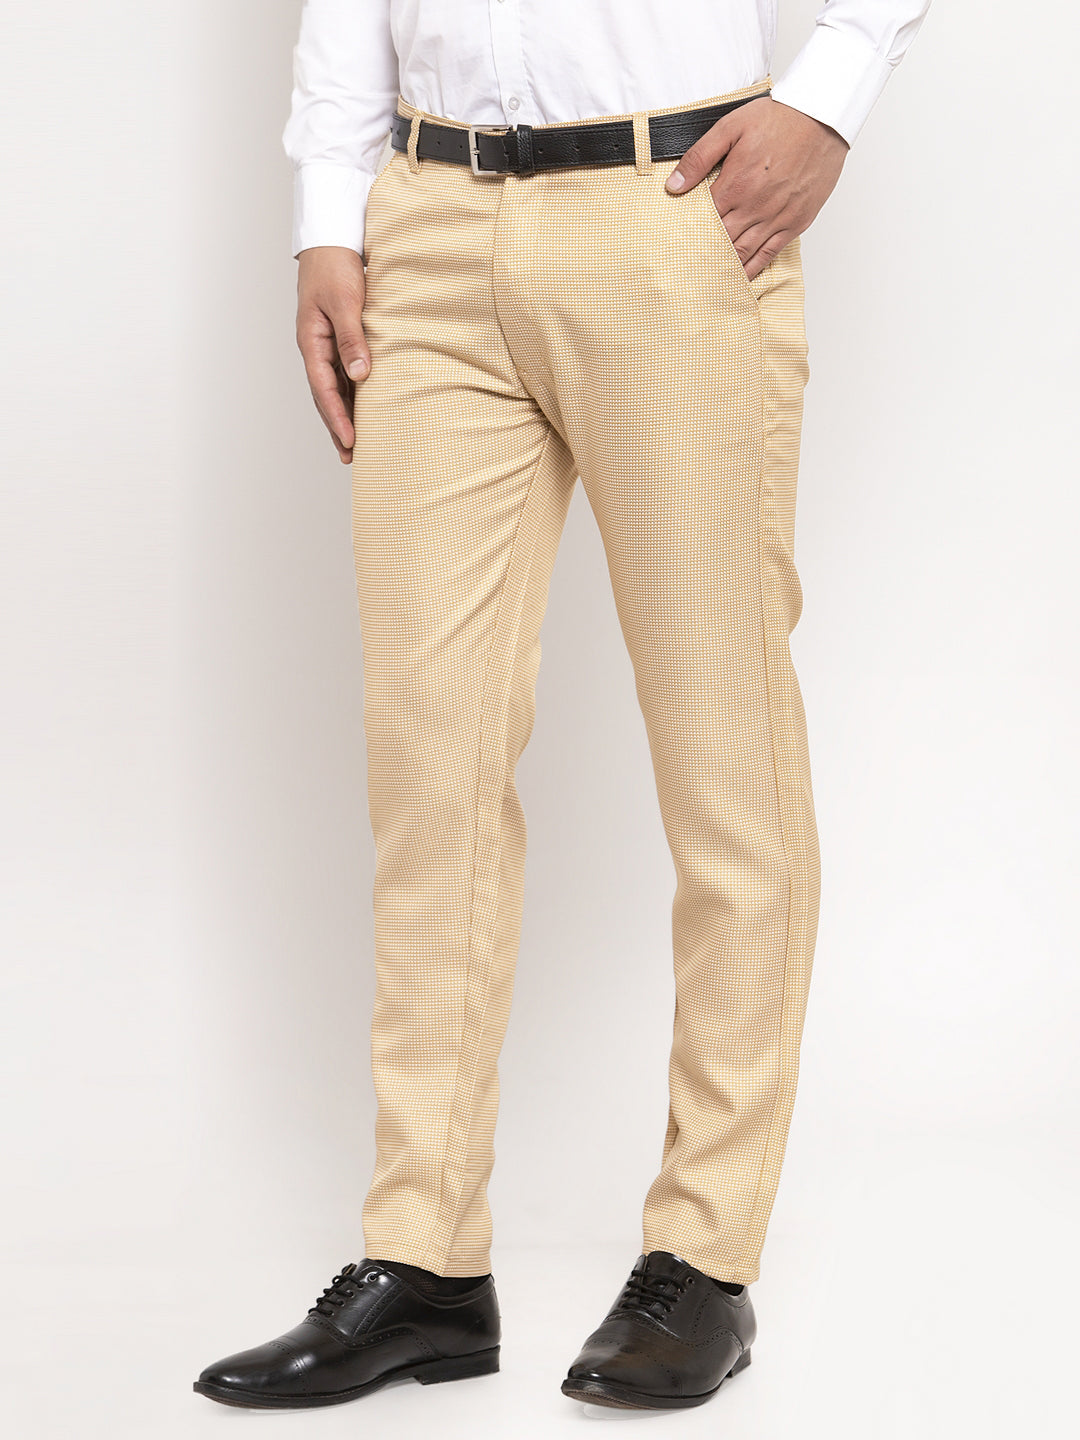 Buy Cream Formal Trousers Online In India